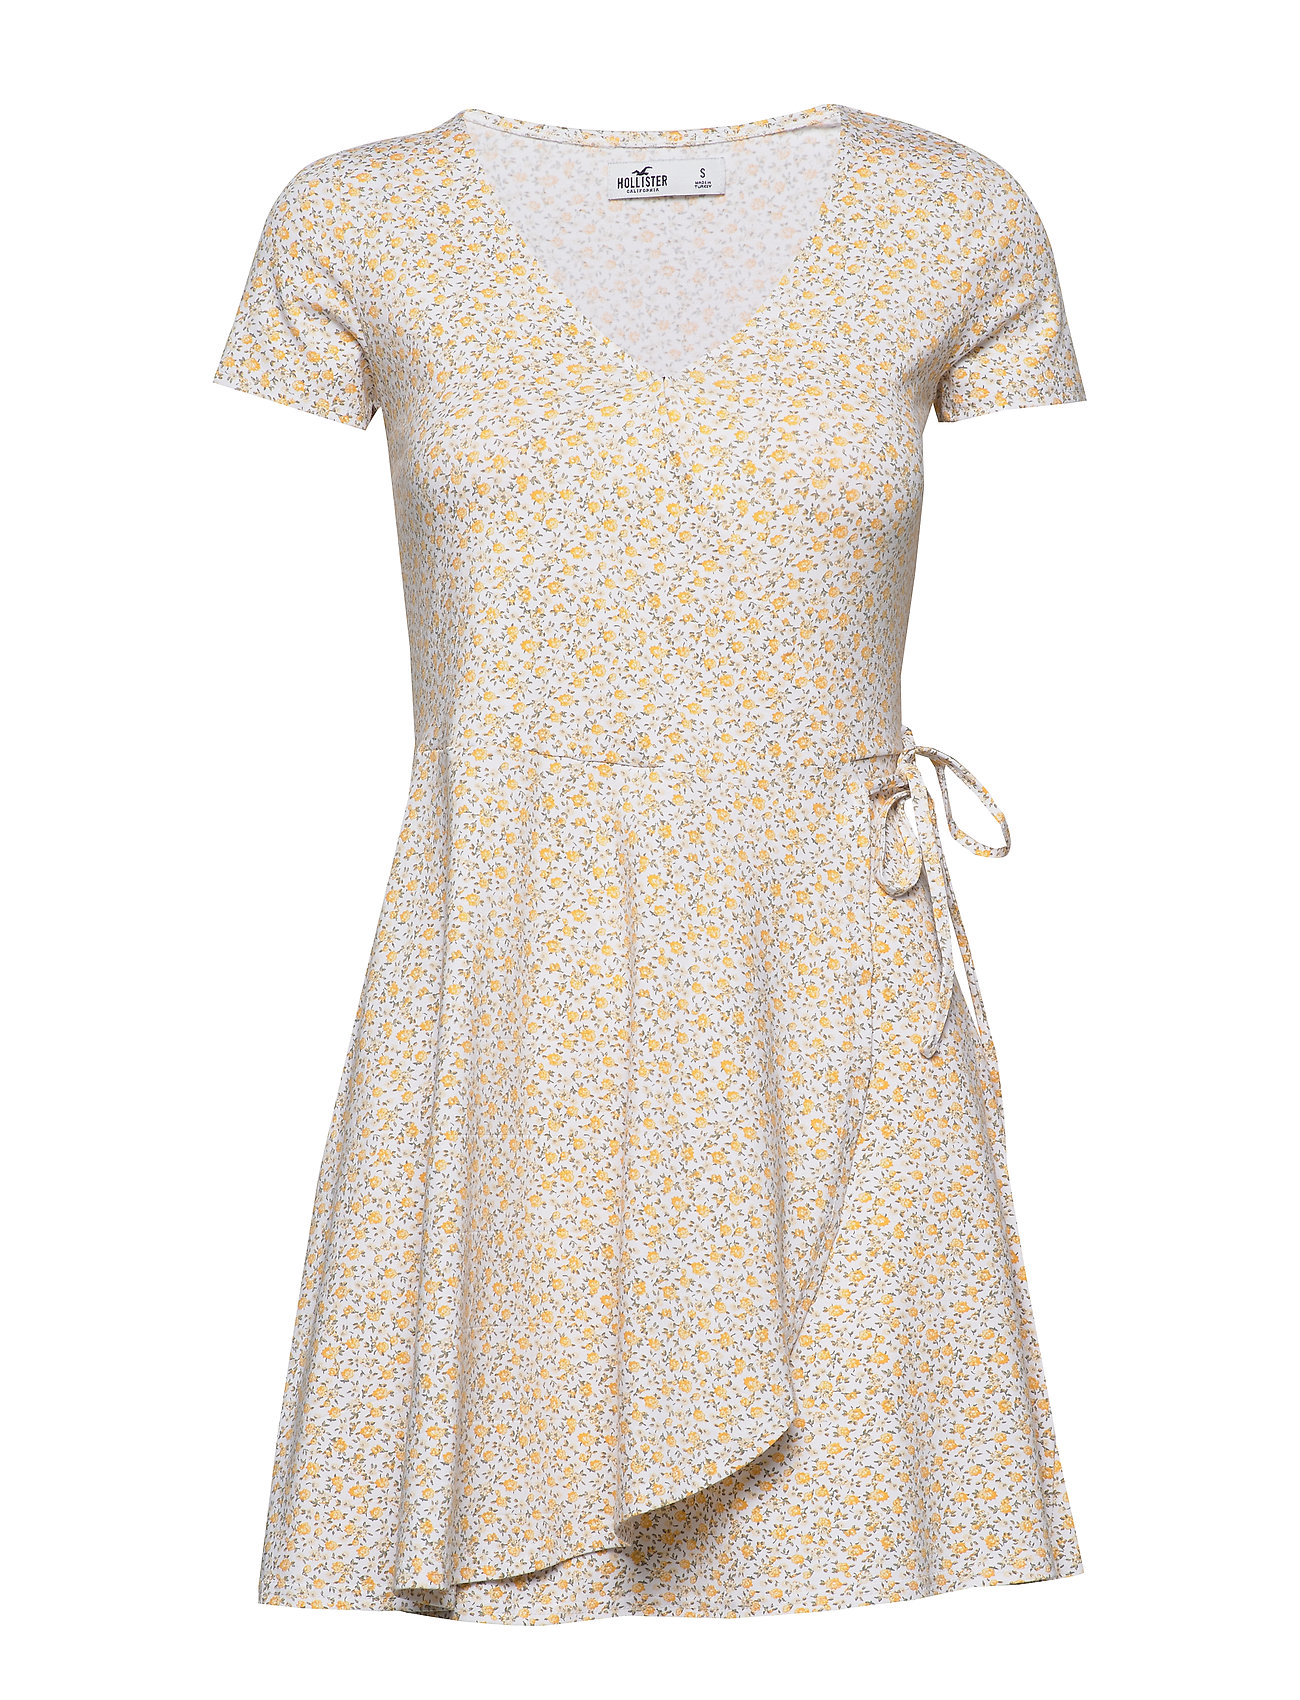 Purchase Wrap Dress Hollister Up To 65 Off